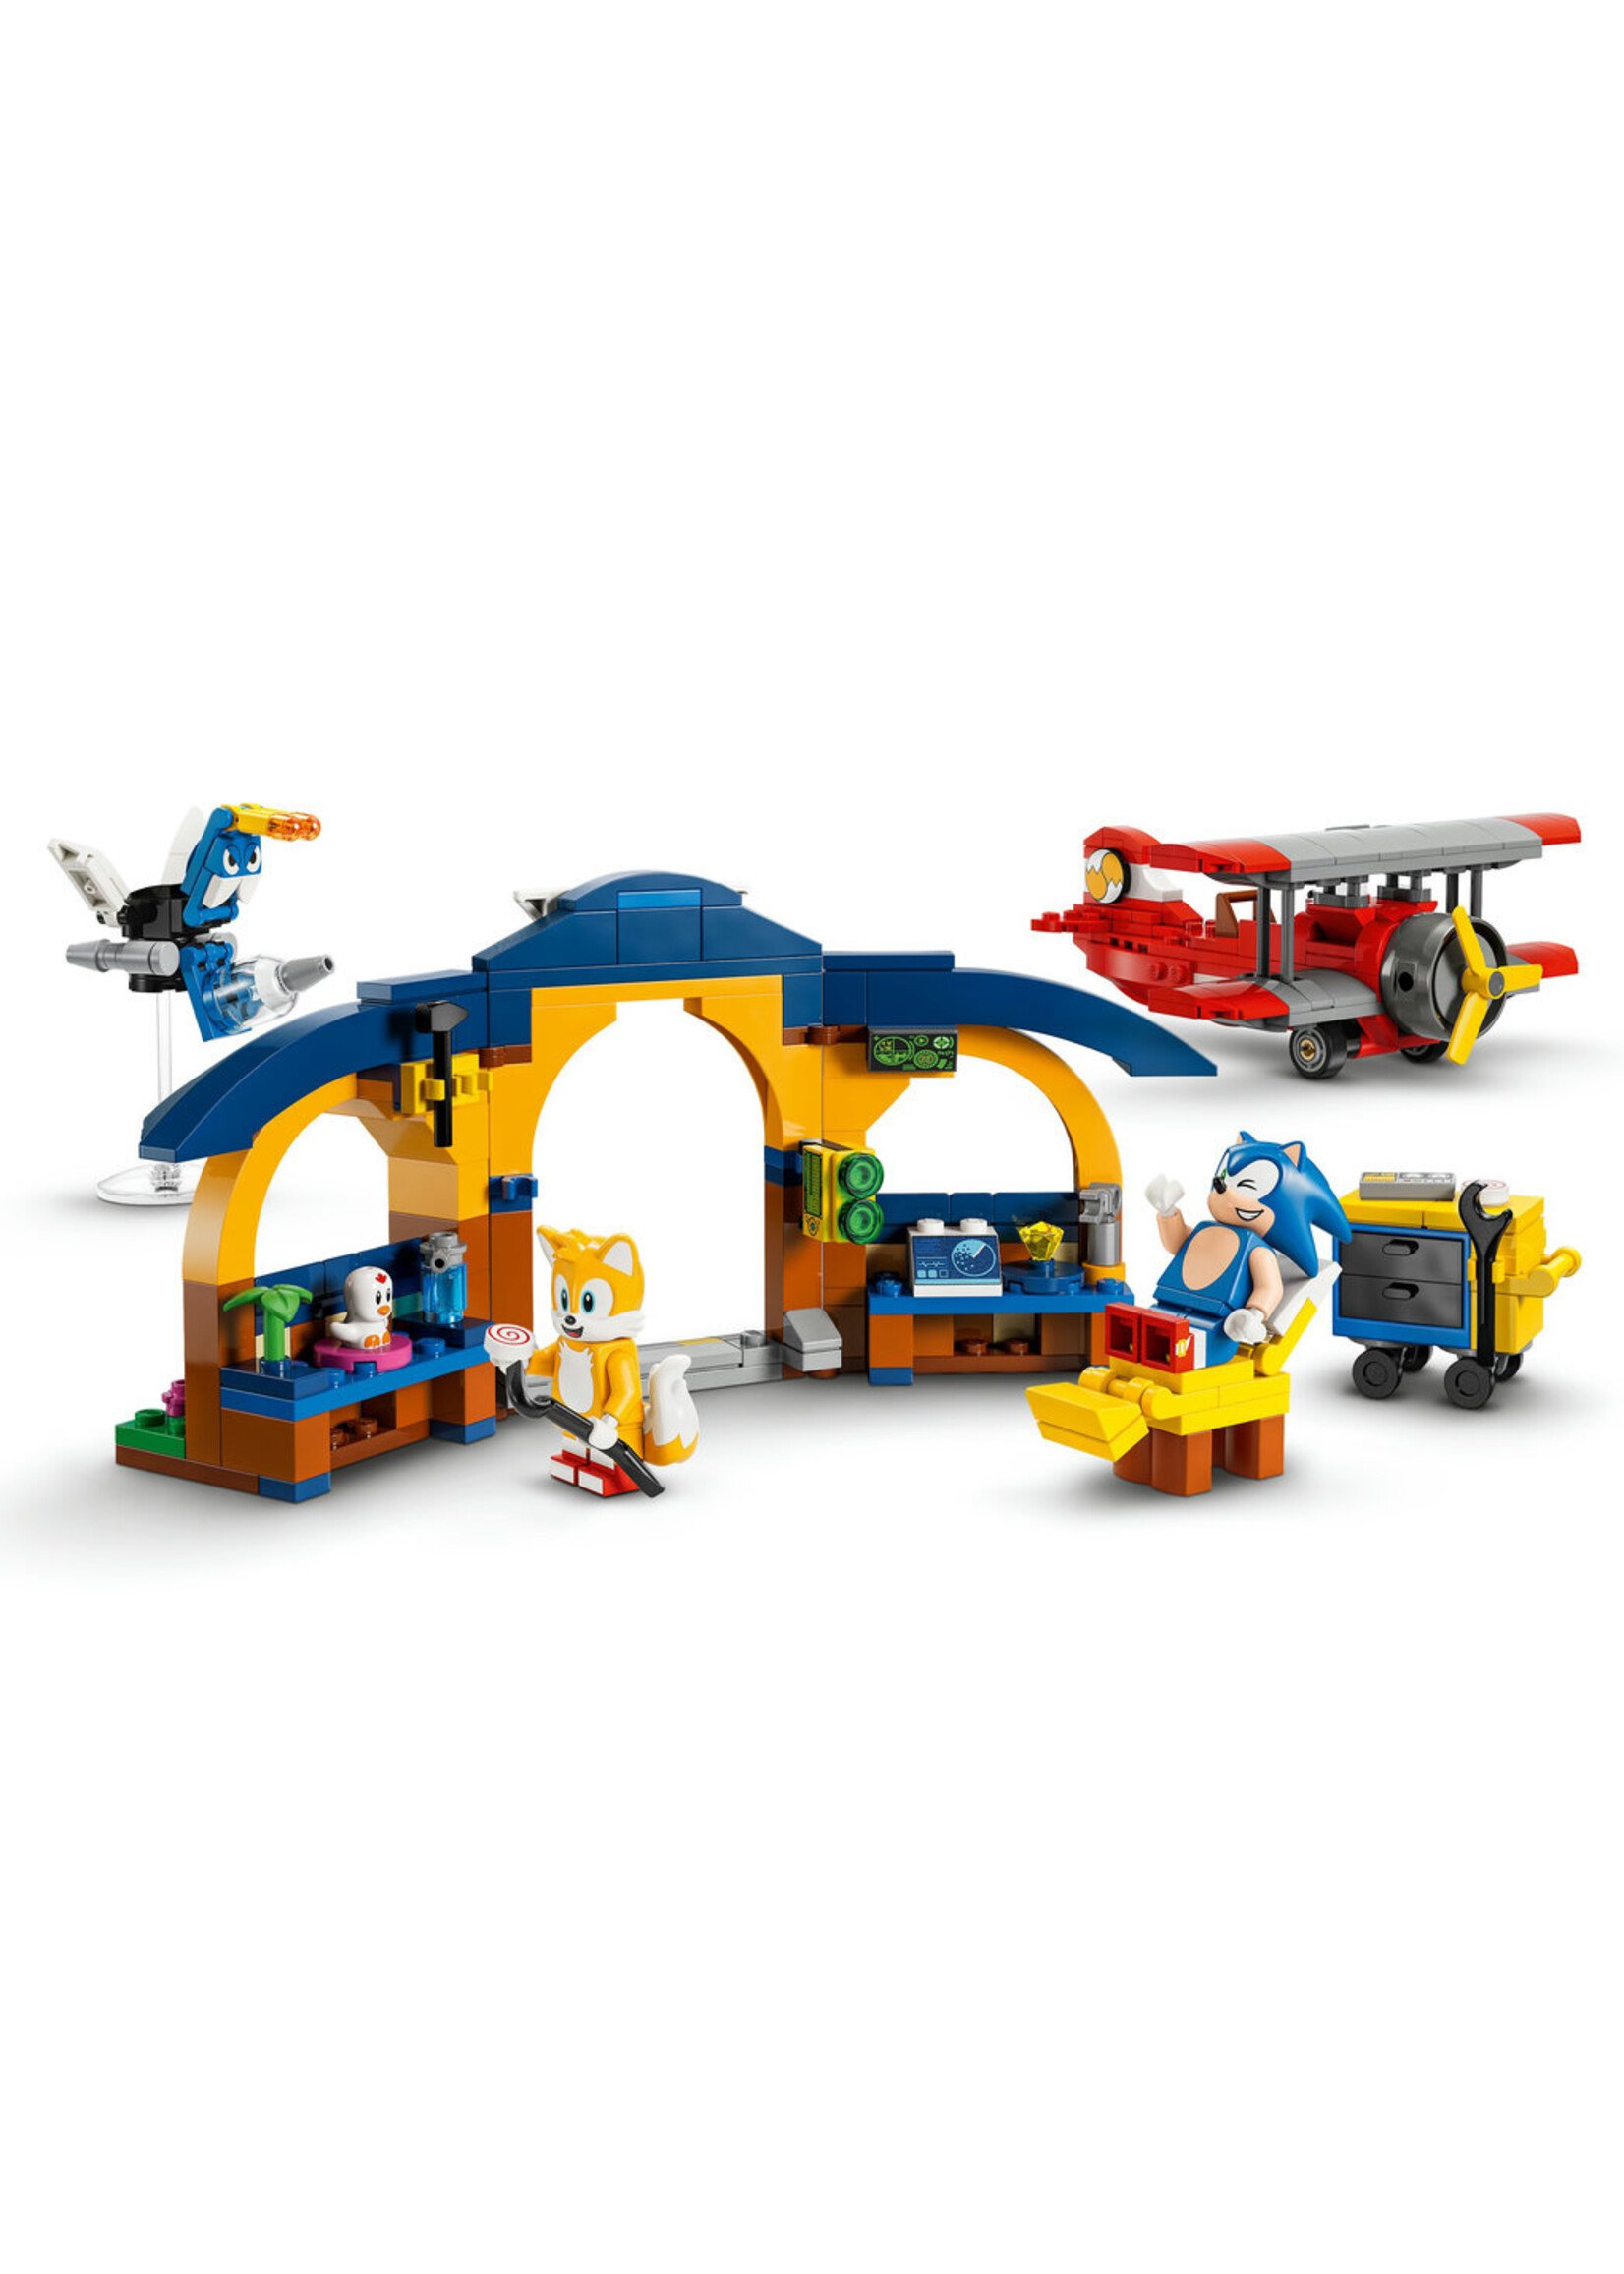 LEGO 76991 Tails' Workshop and Tornado Plane - LEGO Sonic the Hedgehog  Condition New.